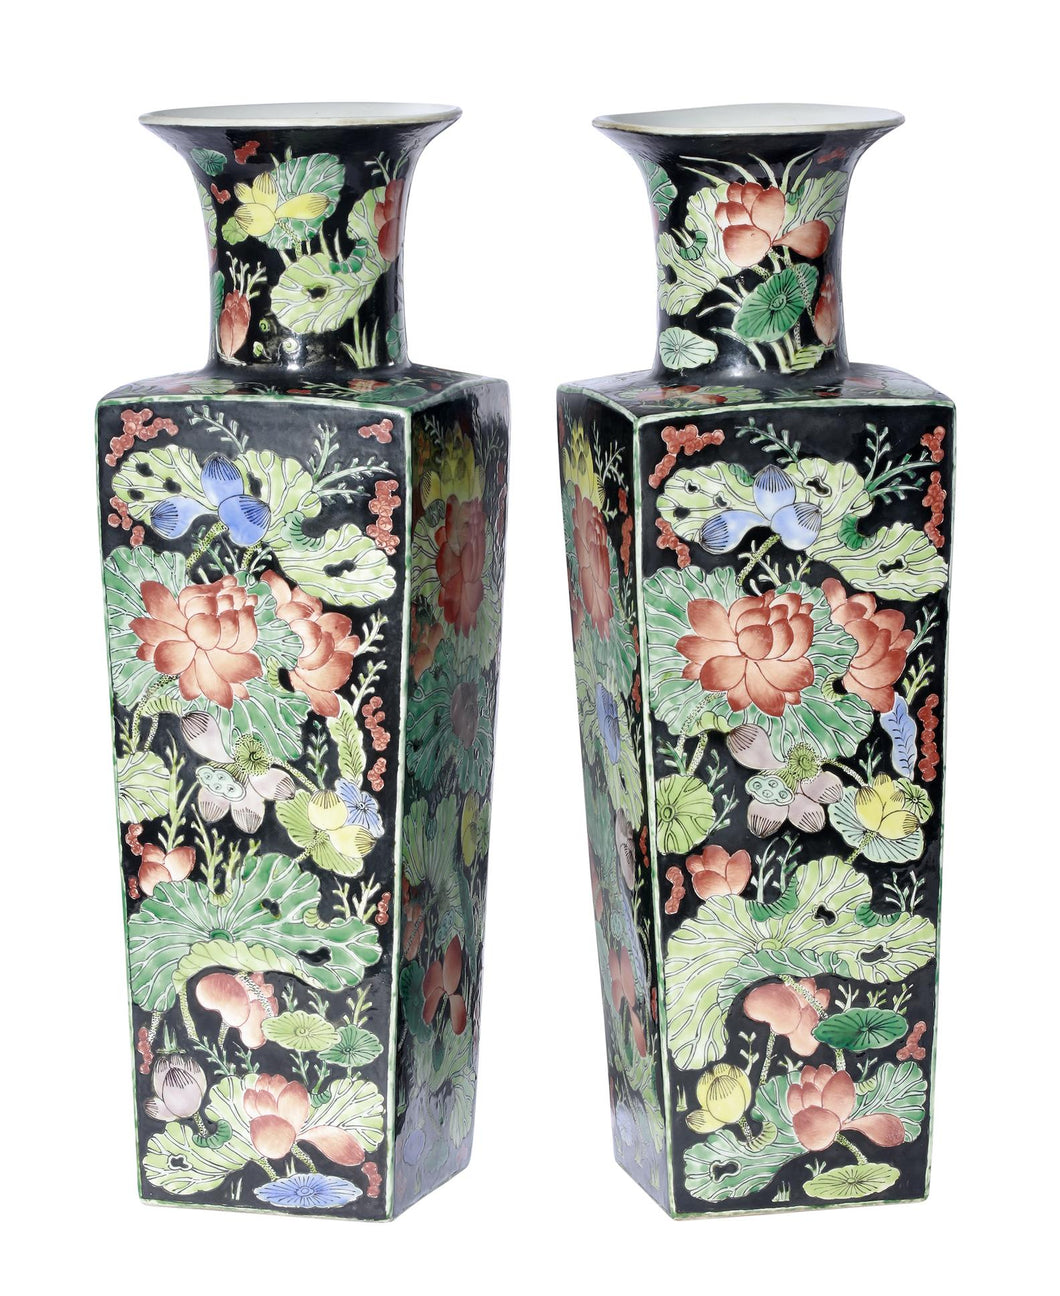 A PAIR OF CHINESE FAMILLE NOIRE PORCELAIN VASES 20TH CENTURY